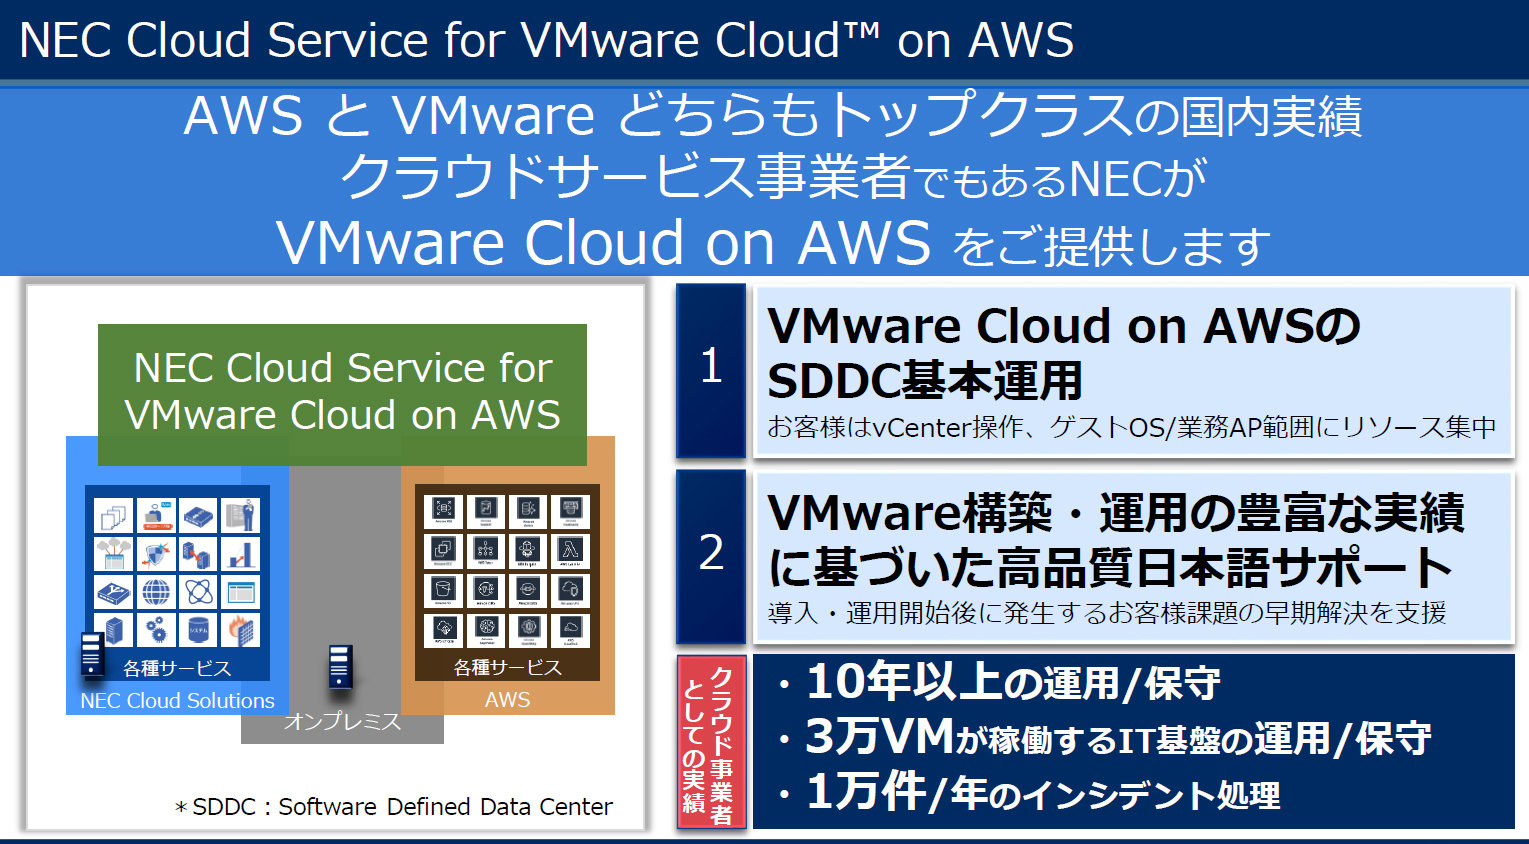 NEC Cloud Service for VMware Cloud on AWSioTFNECj